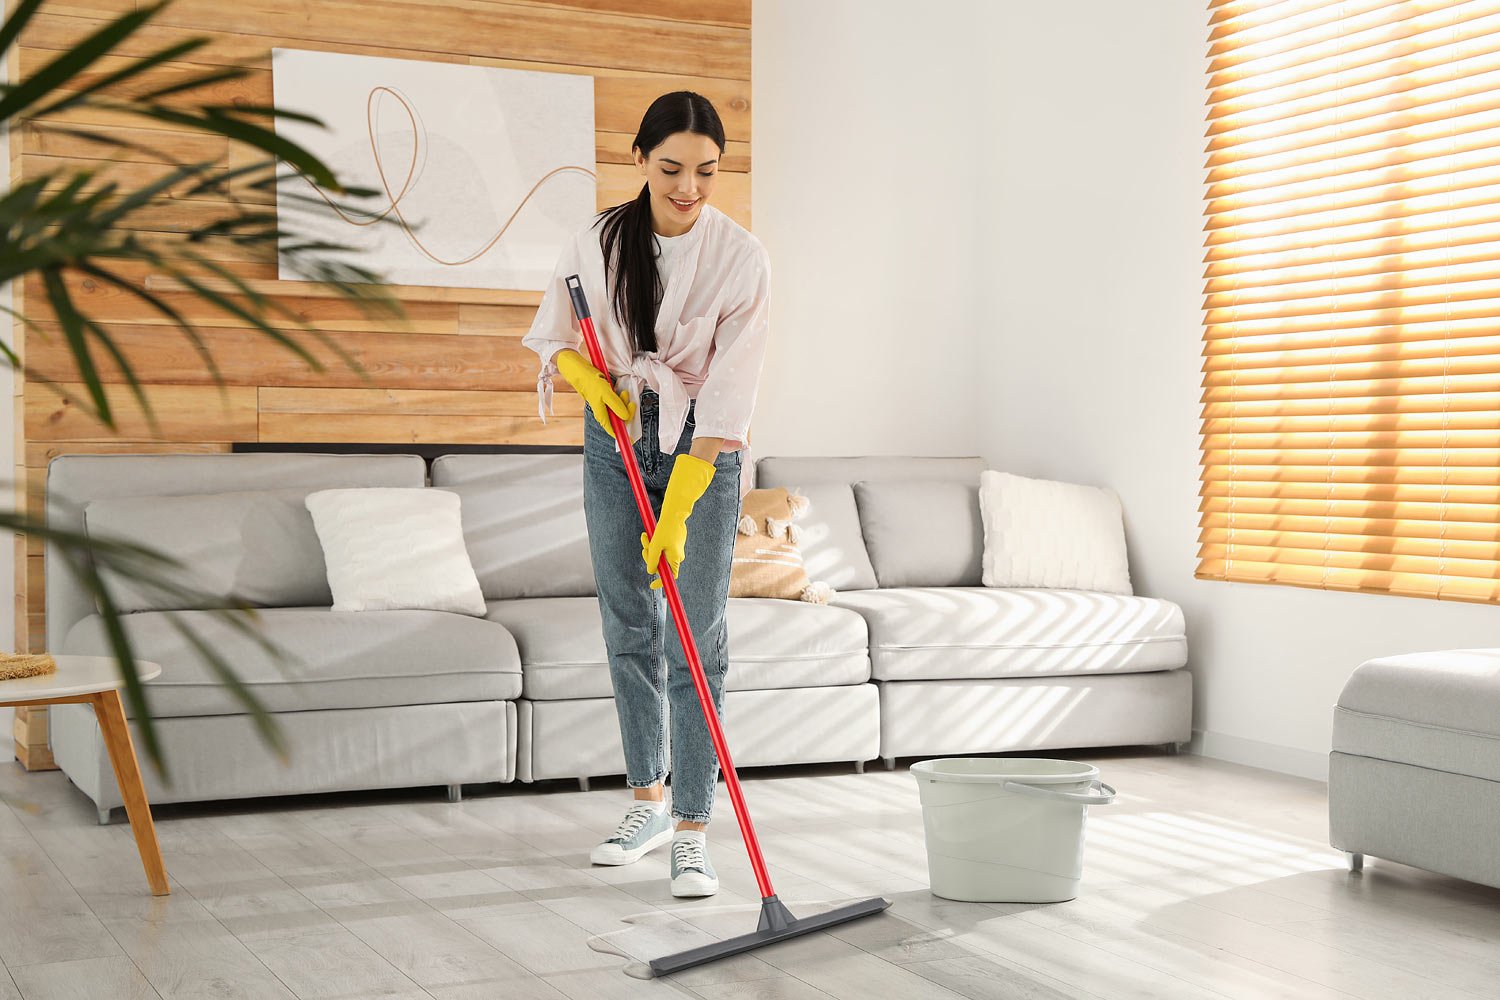 Ecommerce lifestyle photo with stock image of female model and cleaning product